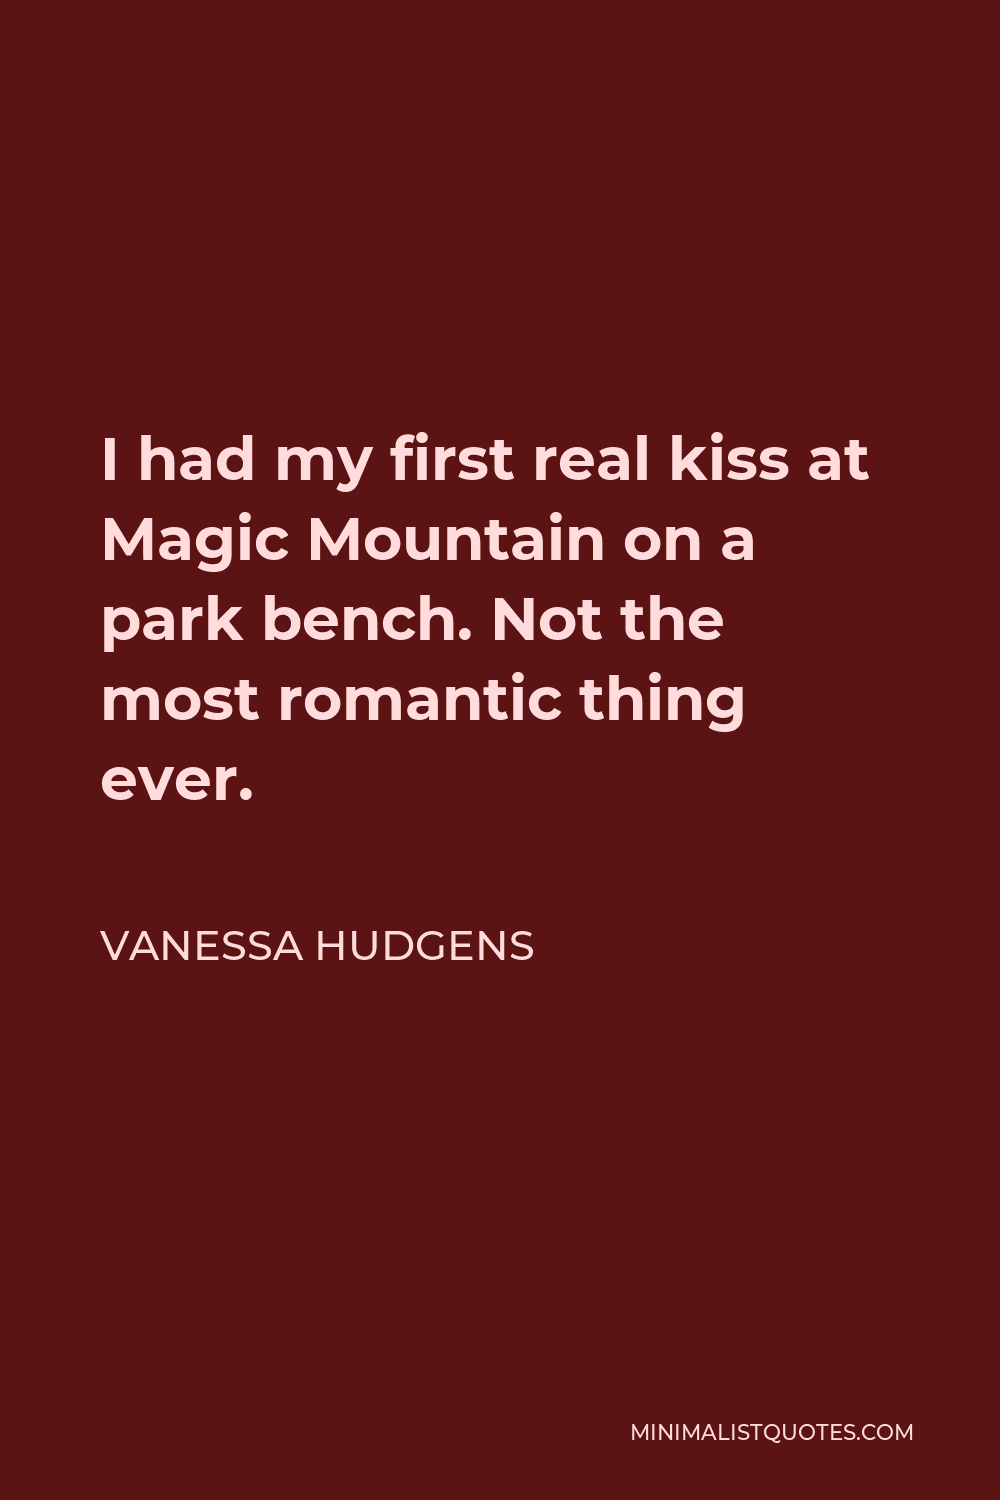 Vanessa Hudgens Quote - I had my first real kiss at Magic Mountain on a park bench. Not the most romantic thing ever.